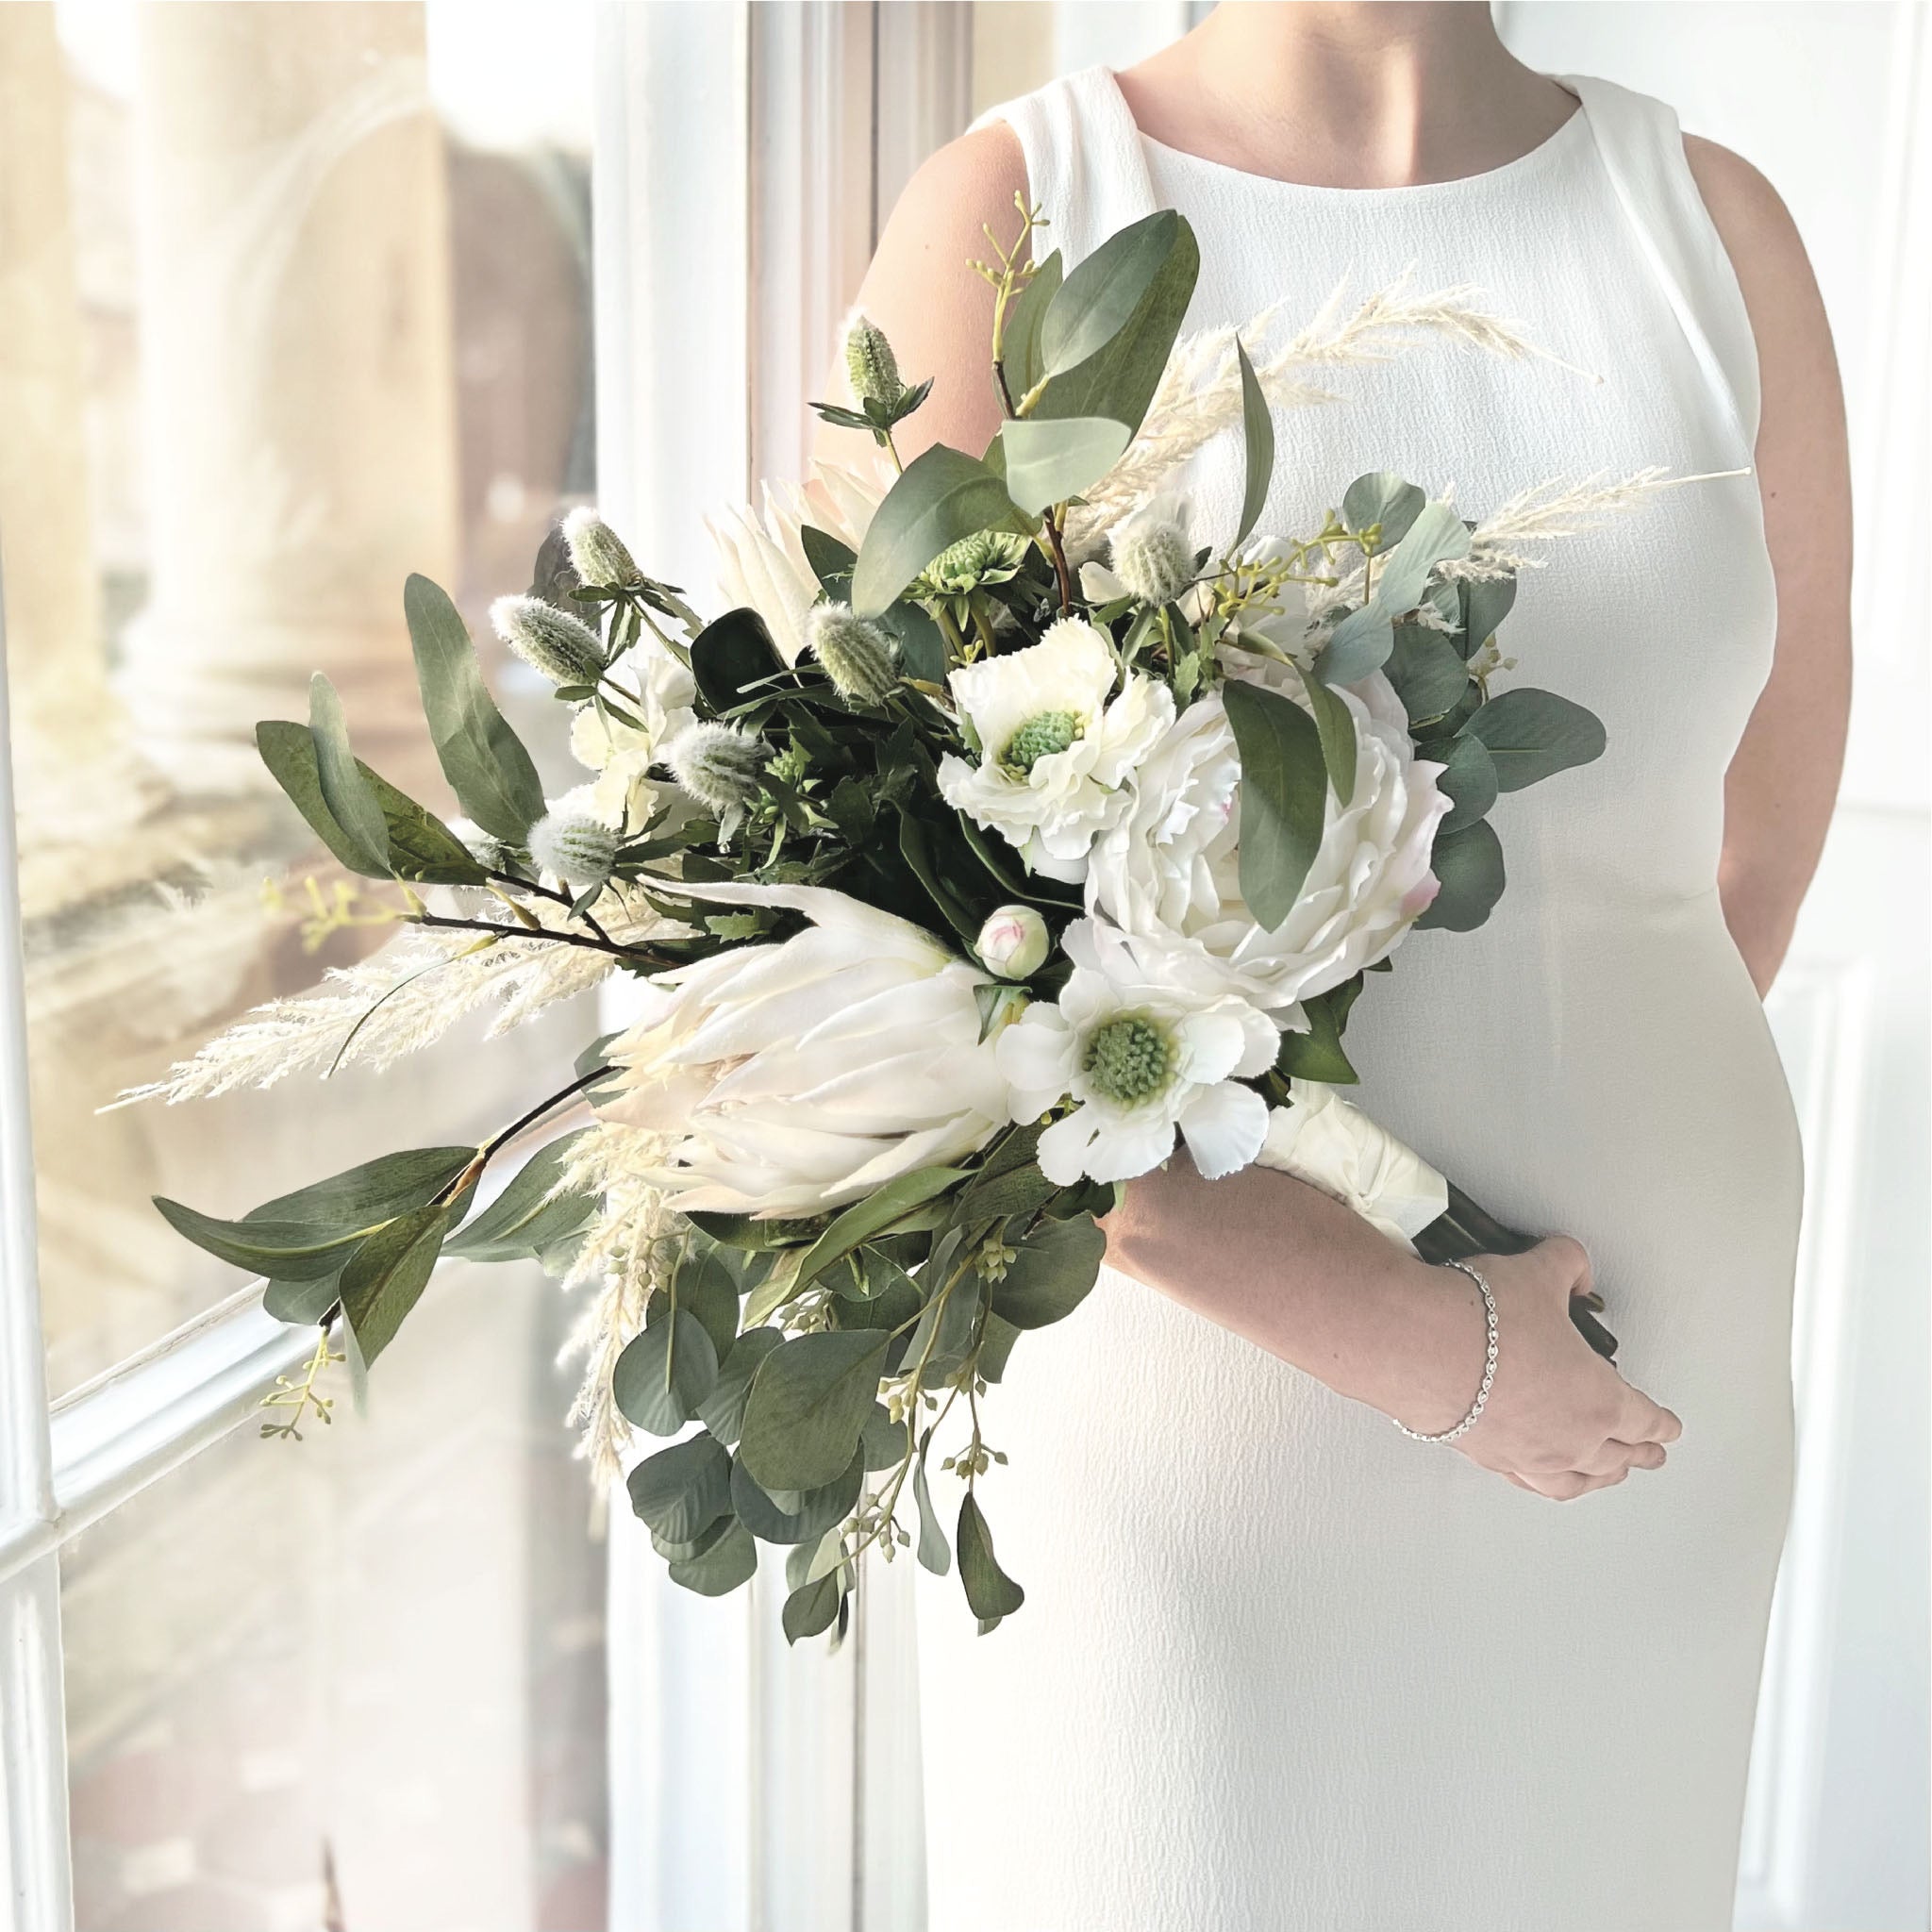 artificial wedding flowers and artificial wedding bouquets from our range of the most realistic silk wedding flowers available in the UK